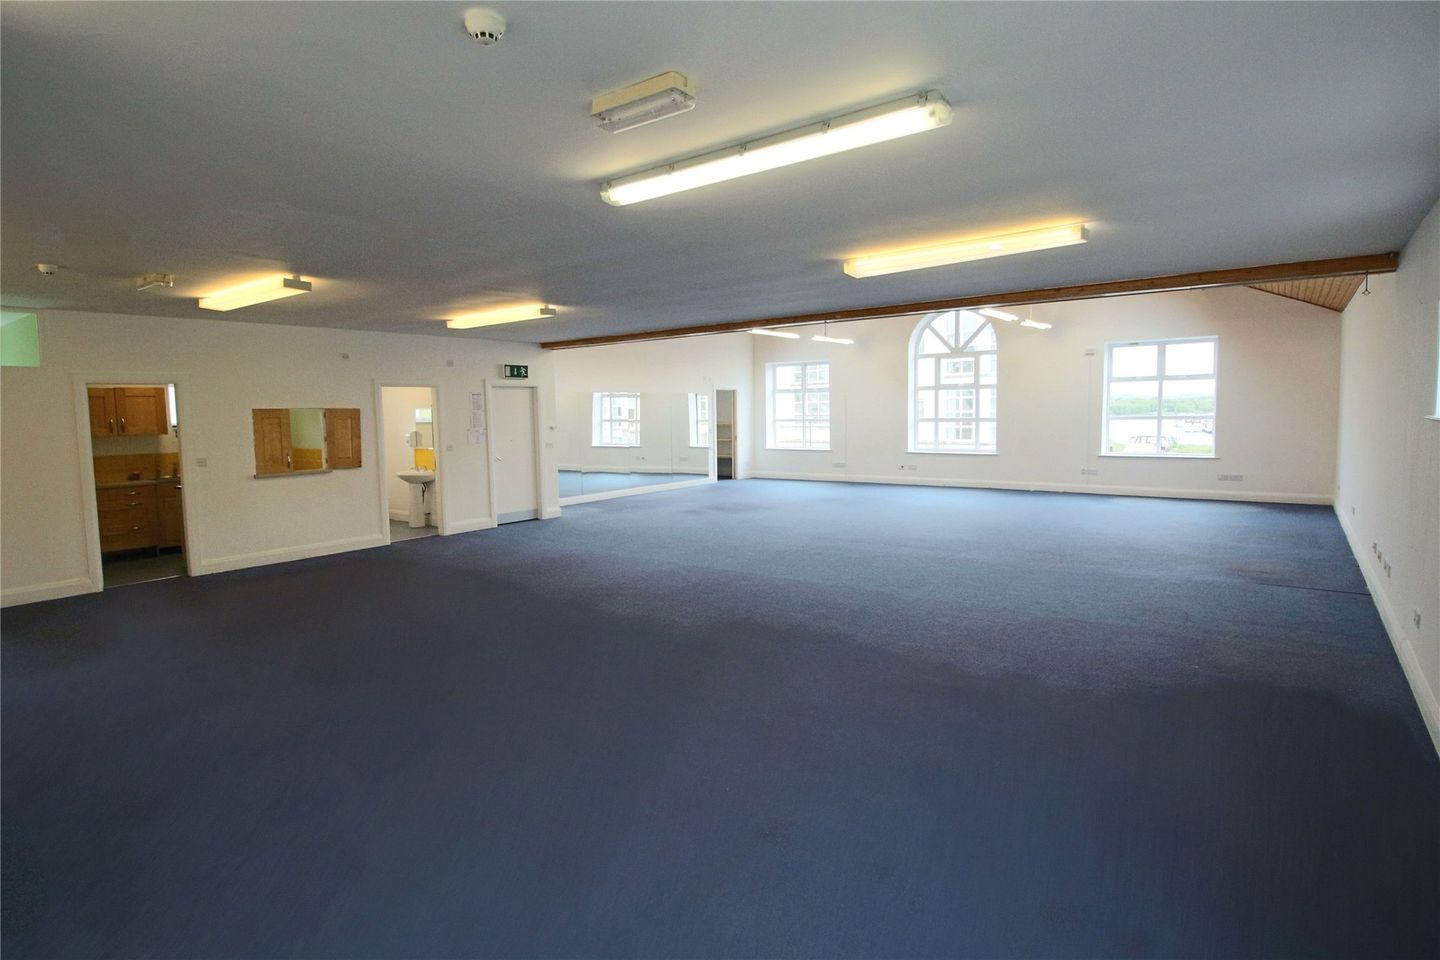 1st Floor Studio Space, Inver Geal, Carrick-on-Shannon, Co. Leitrim